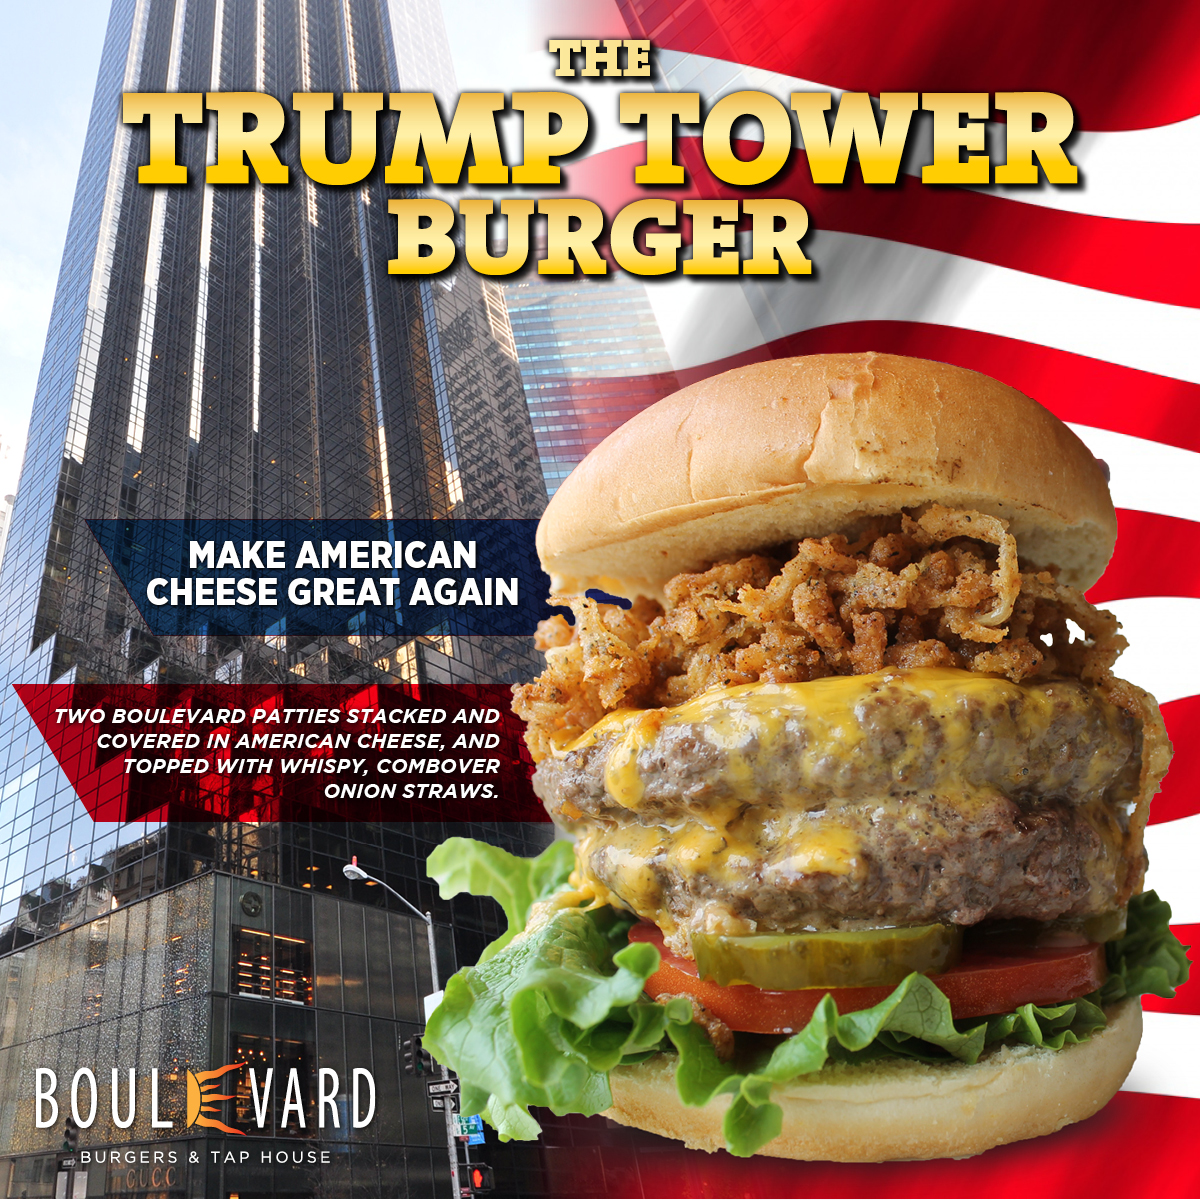 Client Boulevard Burgers & Tap House Features Inaugural “Trump Tower Burger”